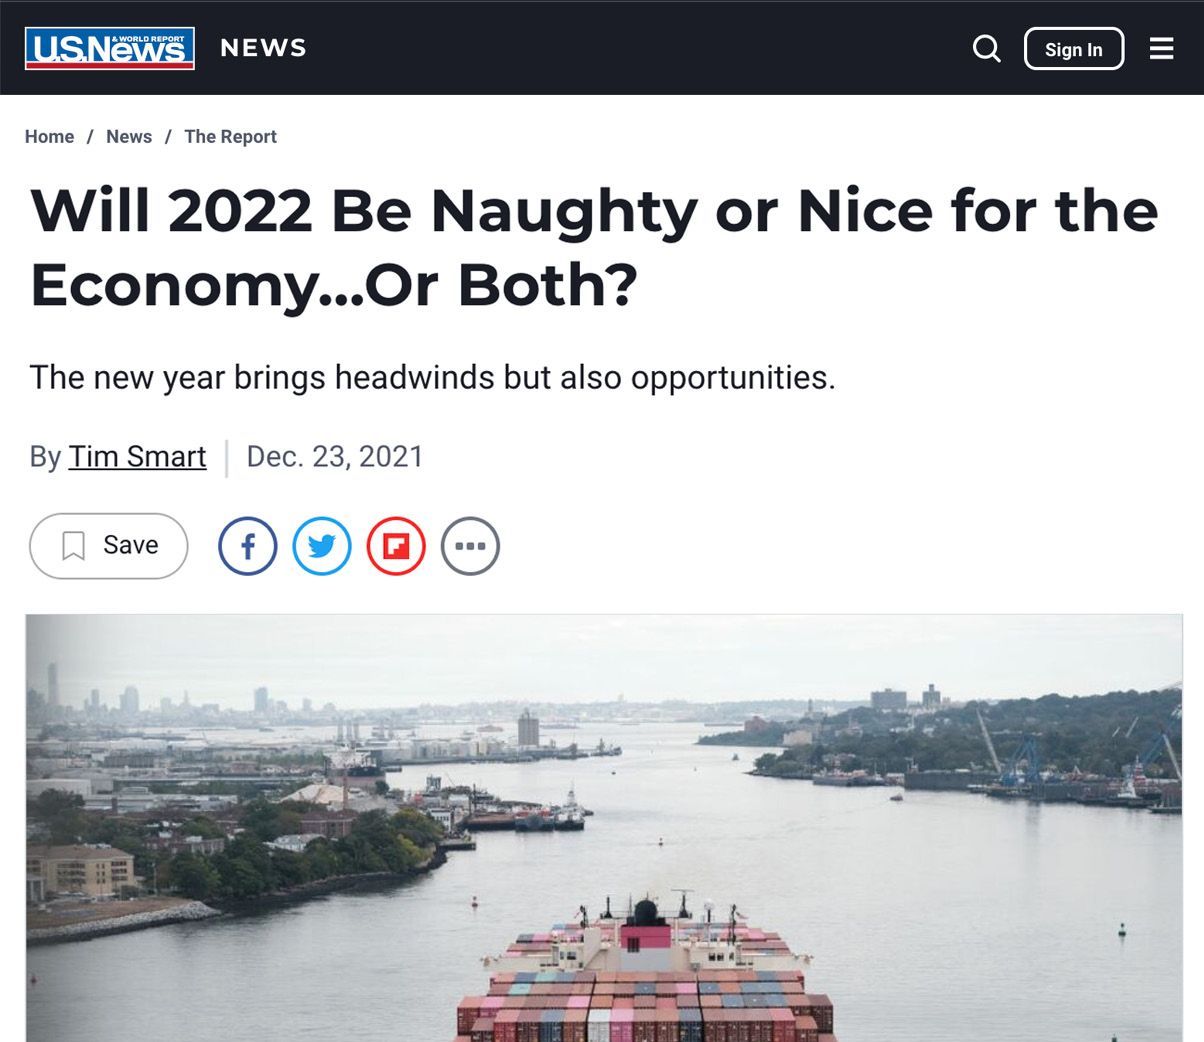 US News: Will 2022 Be Naughty or Nice for the Economy…Or Both?